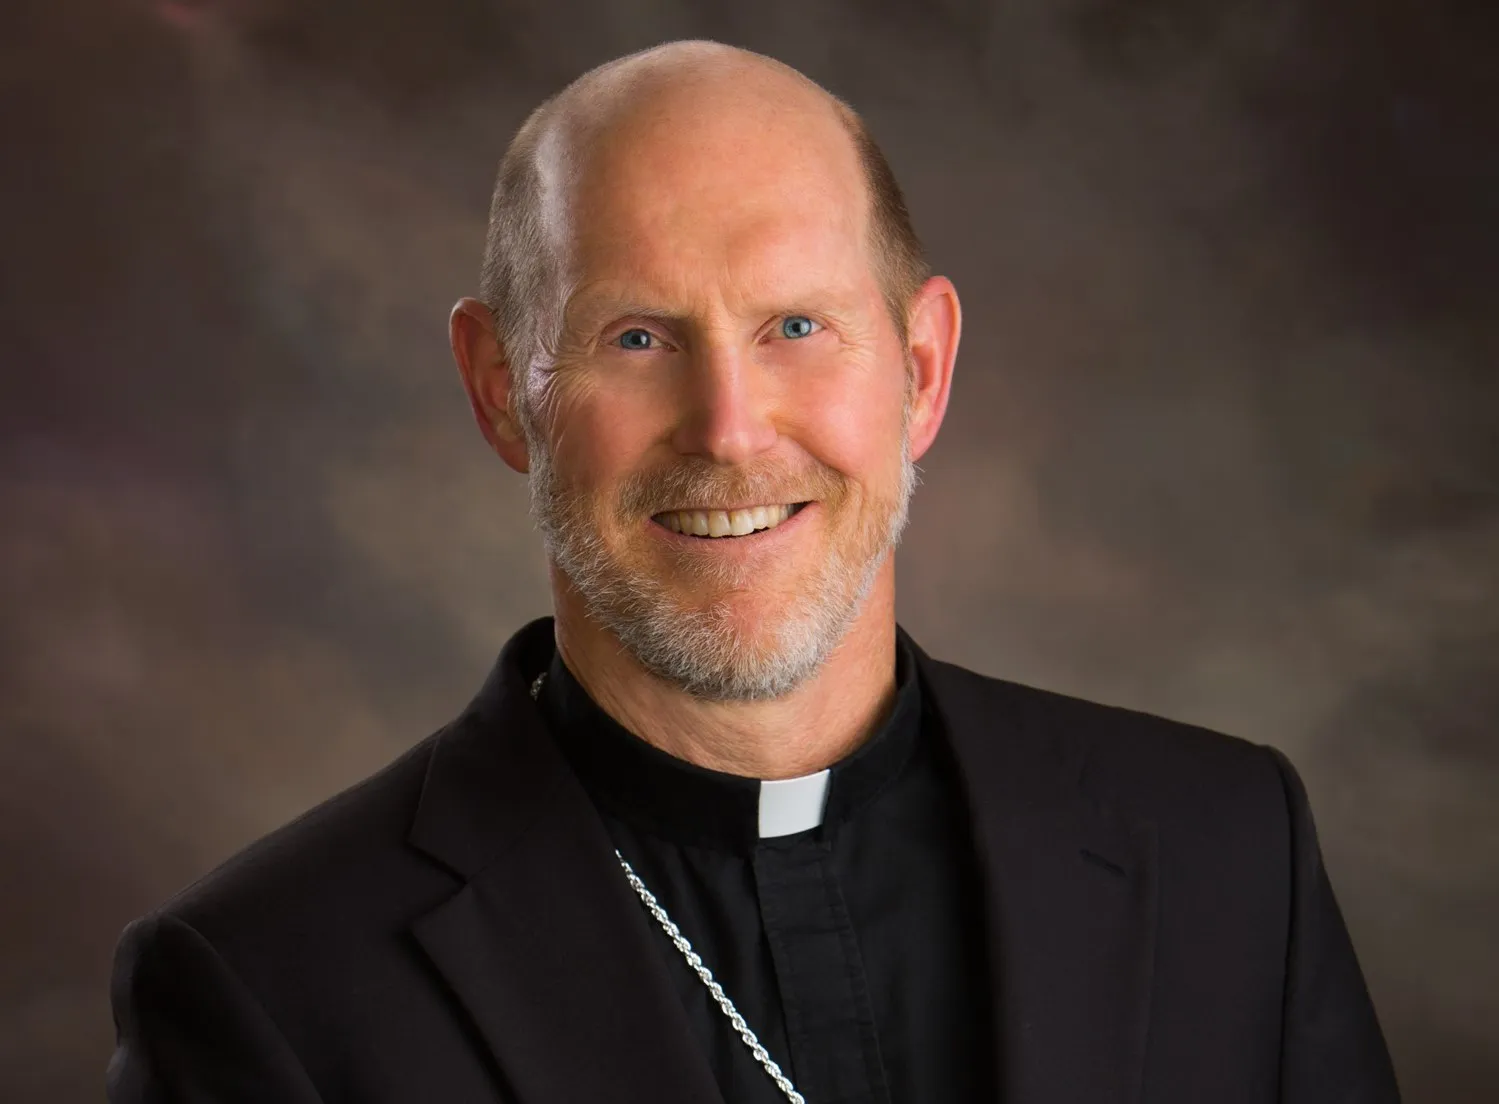 Bishop Thomas Zinkula, who has led the Diocese of Davenport, Iowa since 2017, was named the next archbishop of the Archdiocese of Dubuque, Iowa, on July 26, 2023.?w=200&h=150